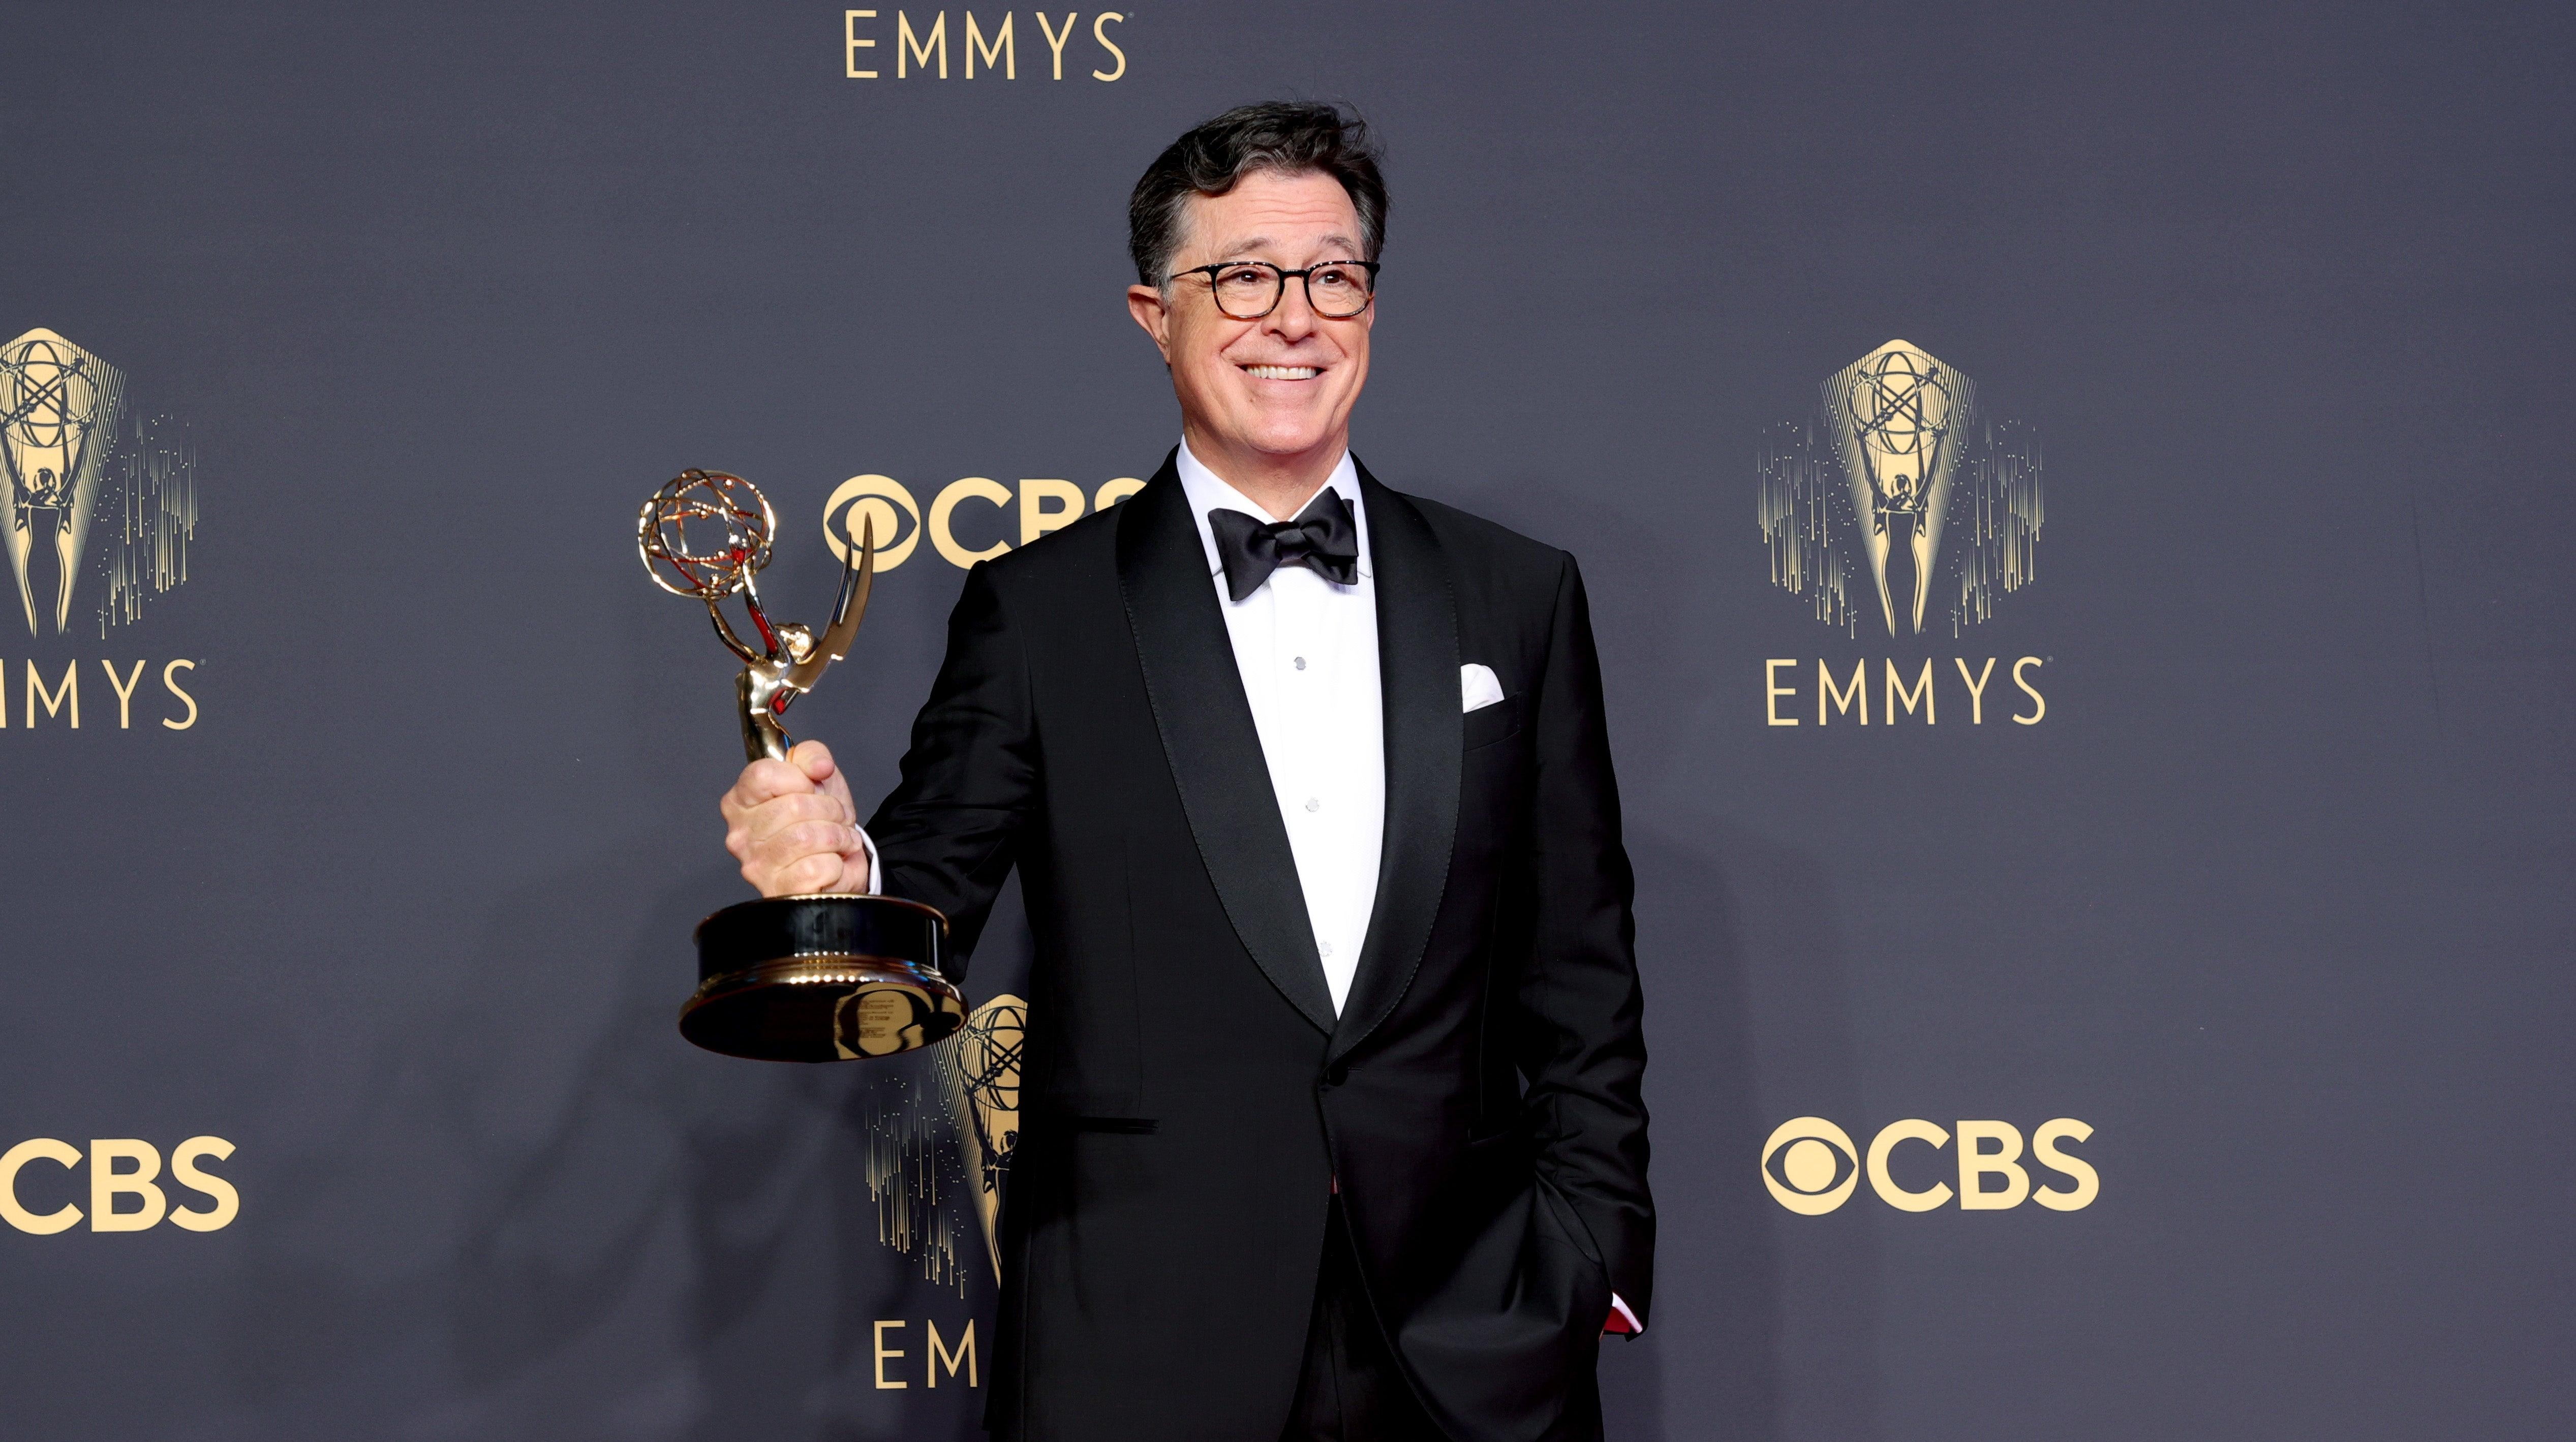 Stephen Colbert tests positive for COVID, tonight’s Late Show canceled